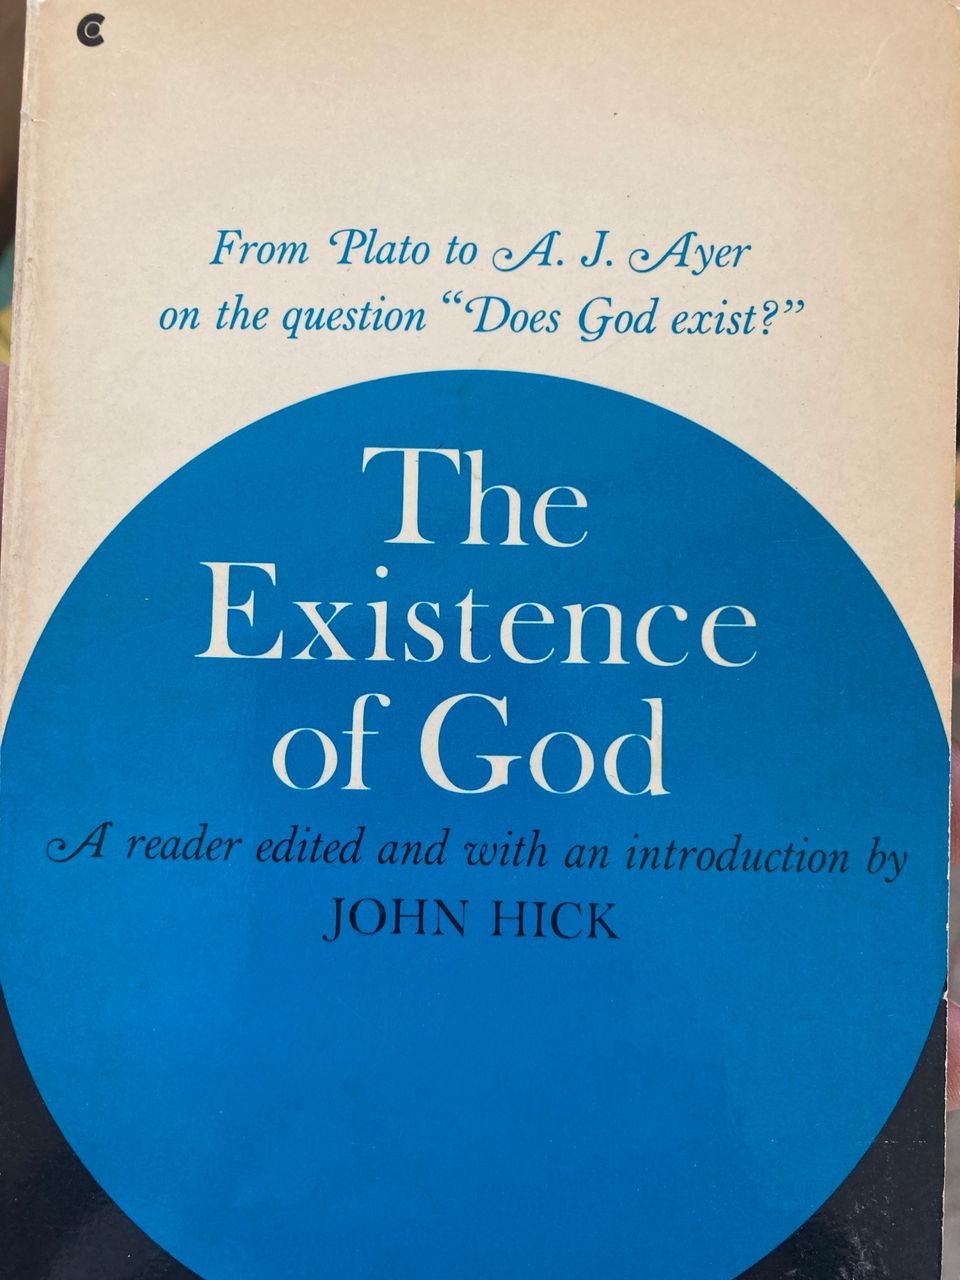 Hick: The Existence of God